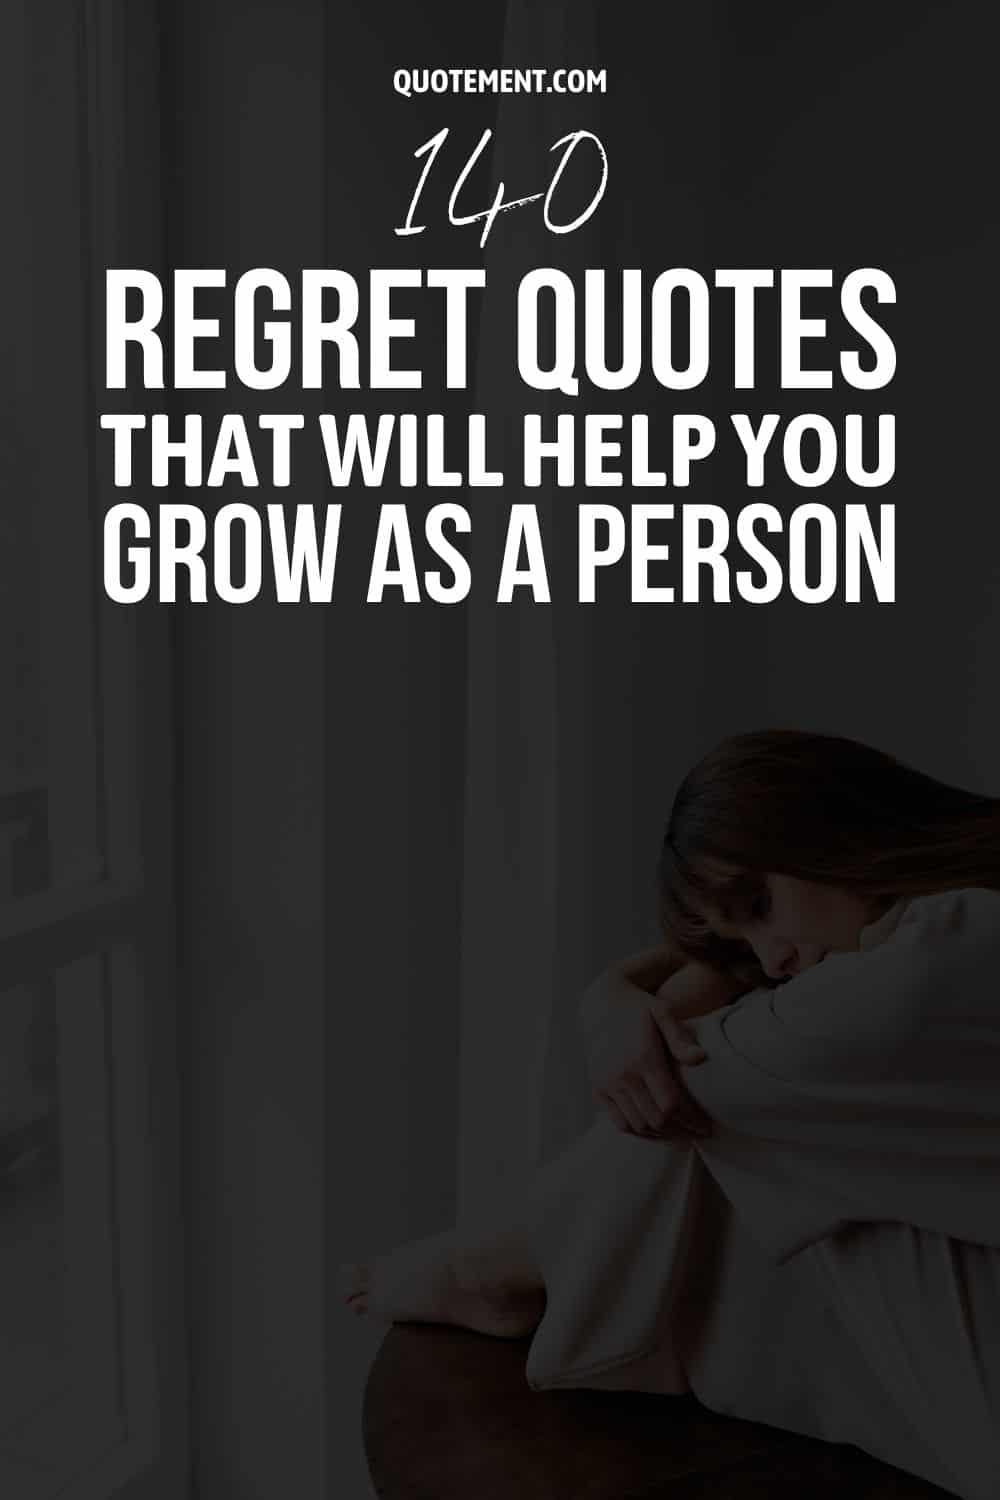 140 Regret Quotes That Will Help You Grow As A Person
